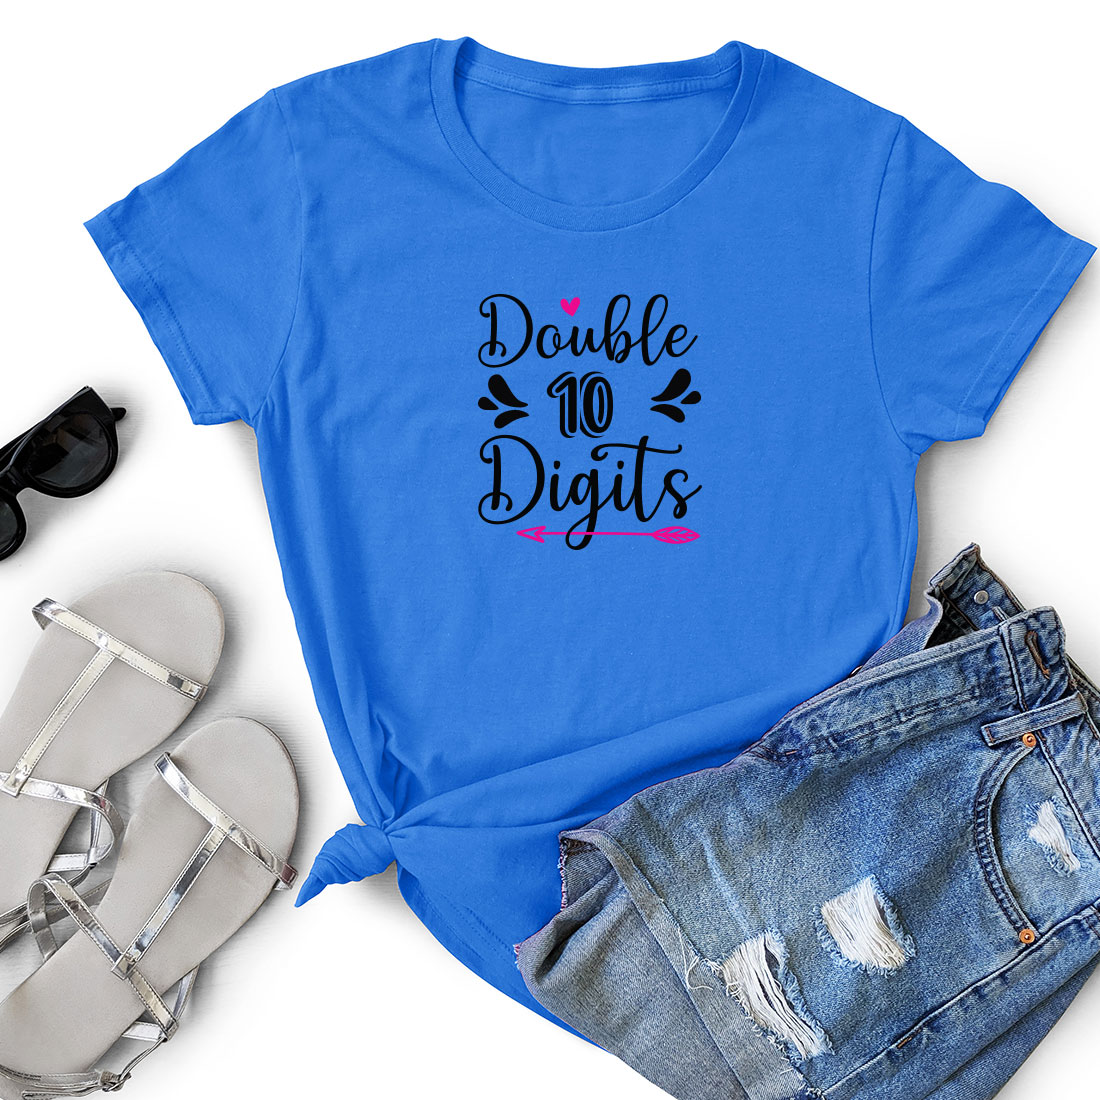 T - shirt that says double no digits next to a pair of shorts.